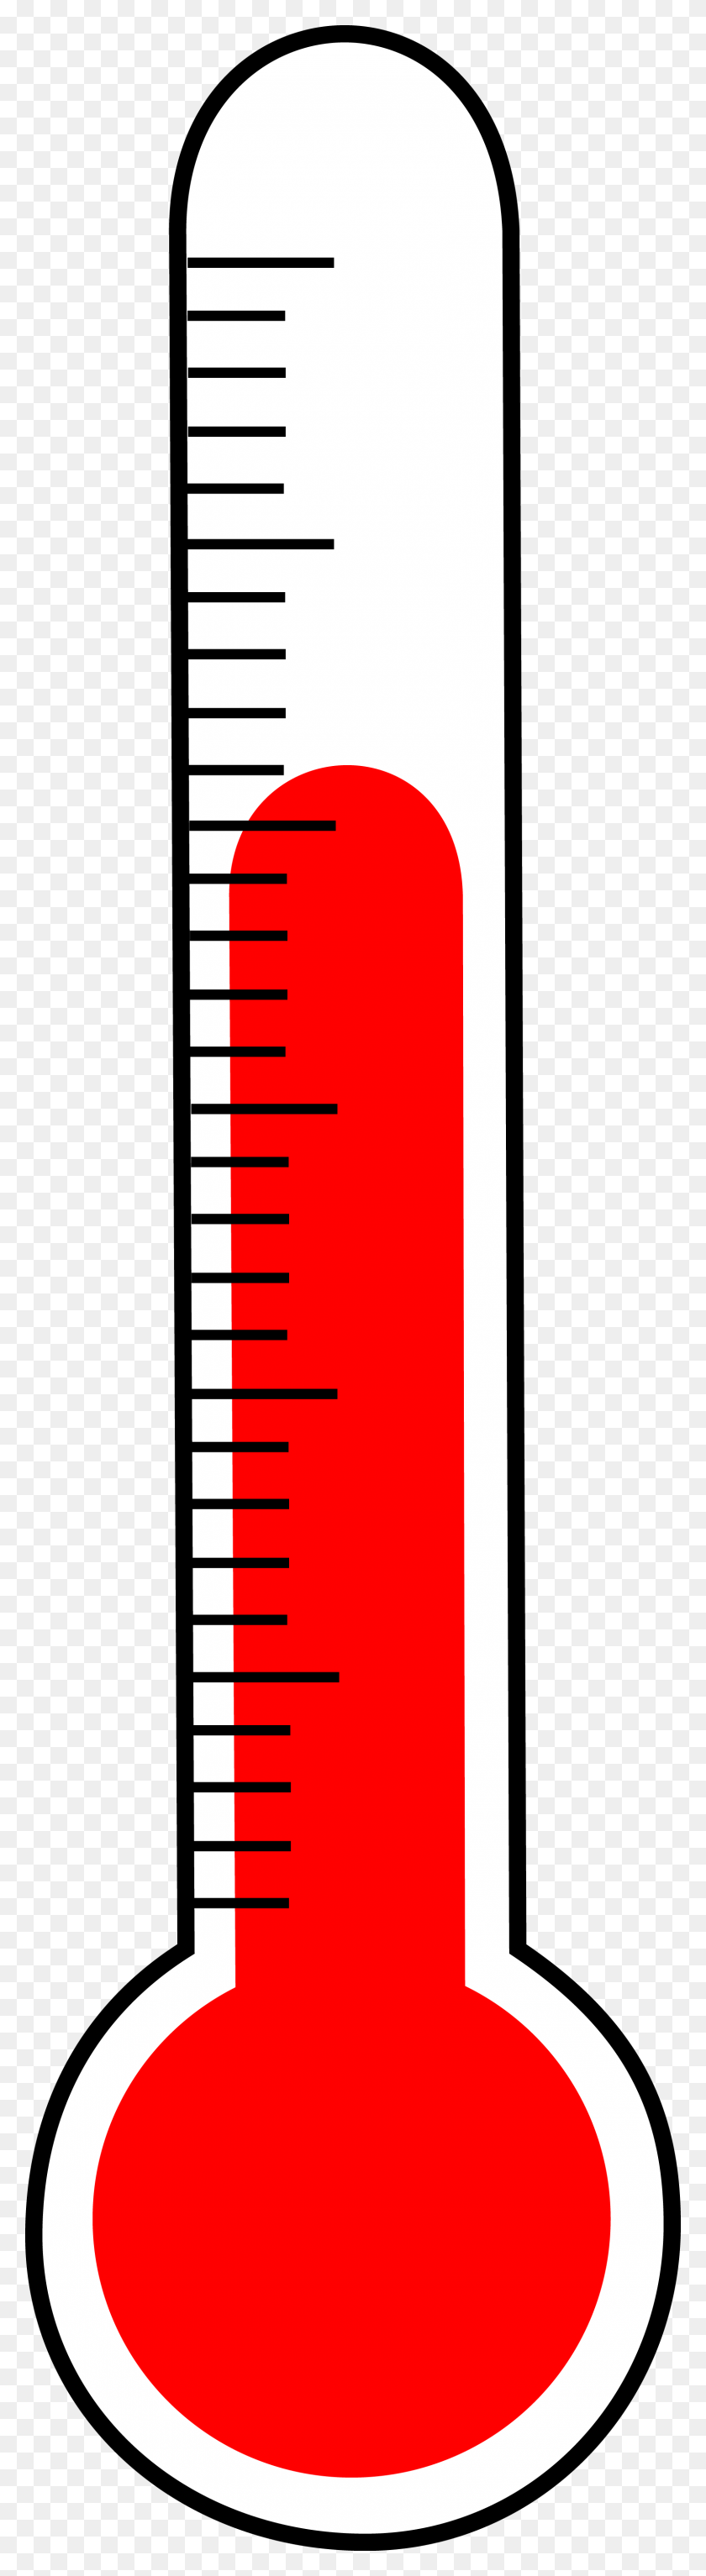 1590x6130 Fundraising Thermometer Clip Art - Fundraiser Clipart